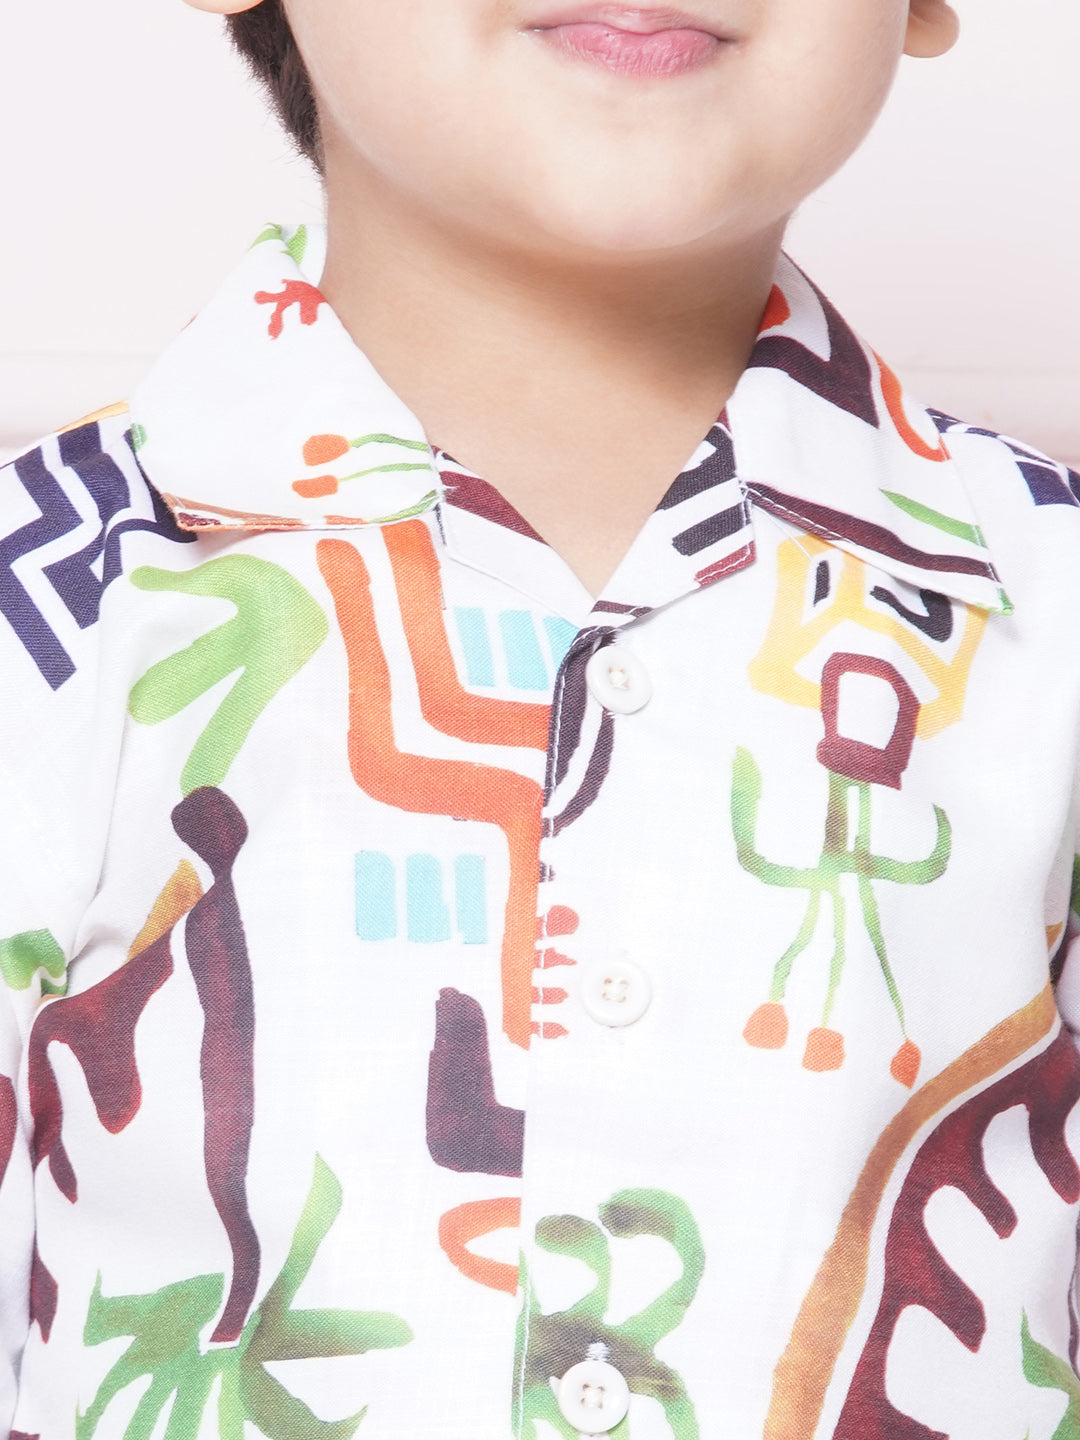 White Cotton Shirt & shorts Half Sleeves with Collar and Tropical CO-ORDS Set for Boys